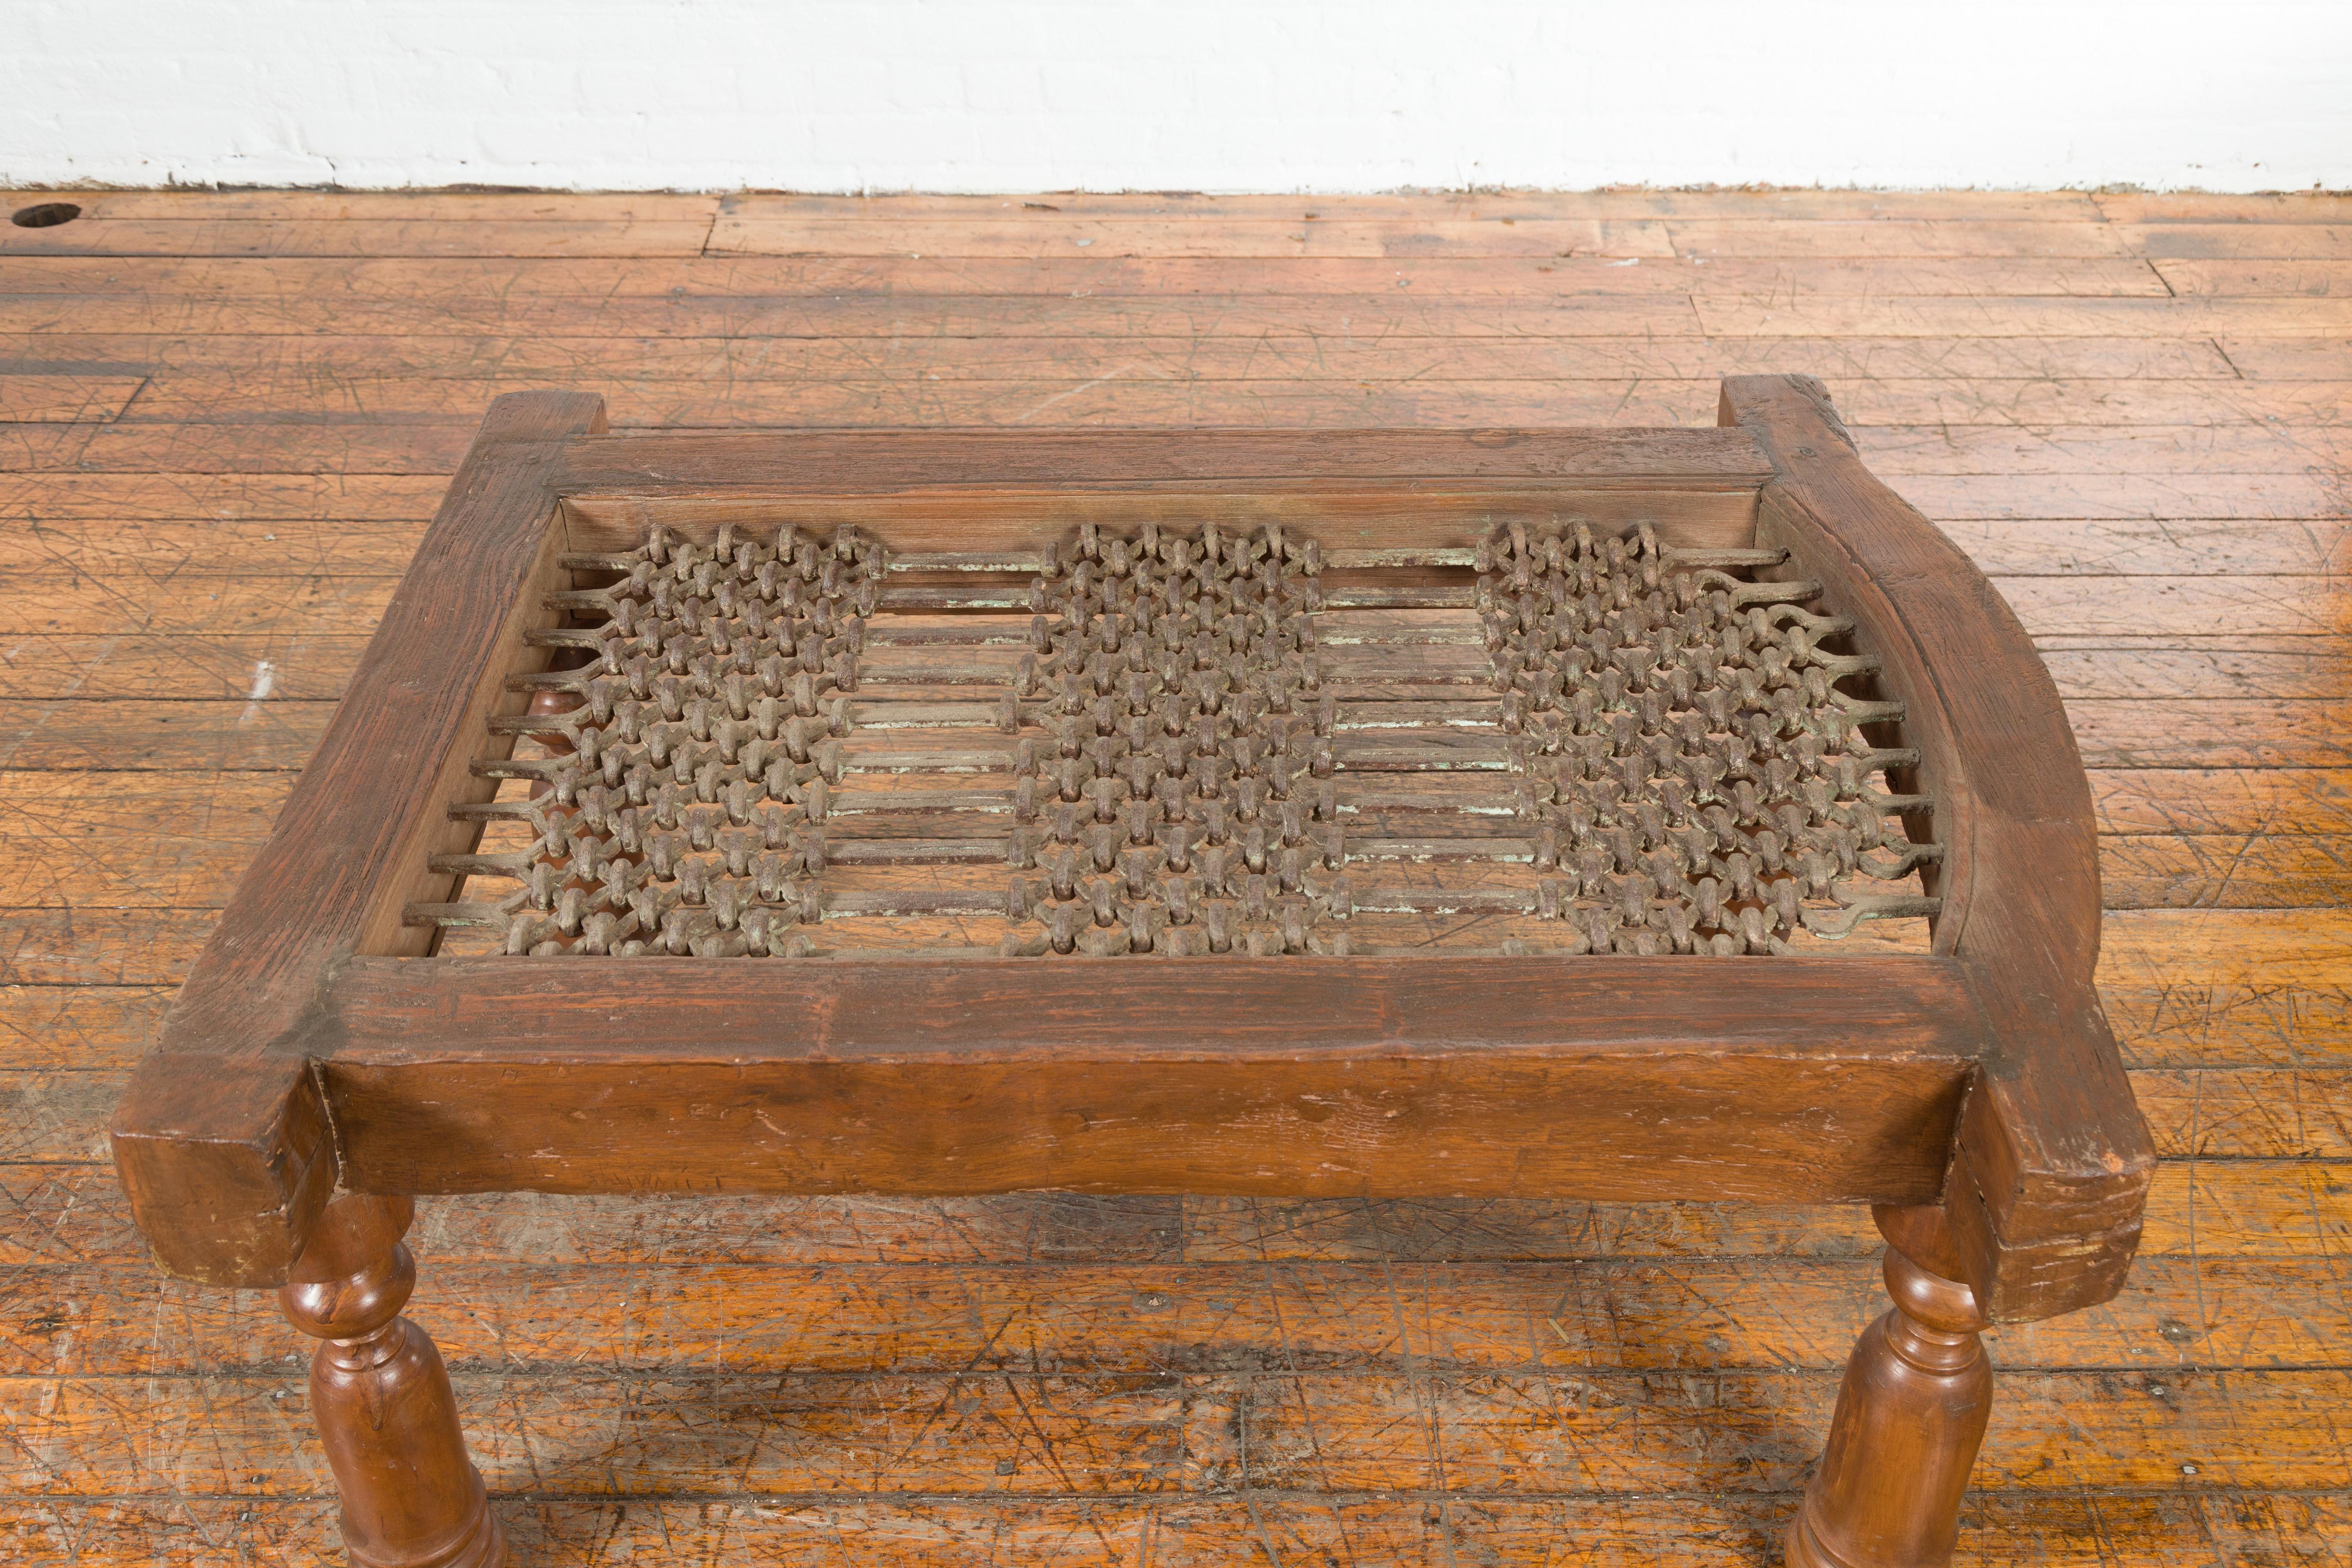 Antique Indian Arched Window Grate Made into a Coffee Table with Baluster Legs In Good Condition For Sale In Yonkers, NY